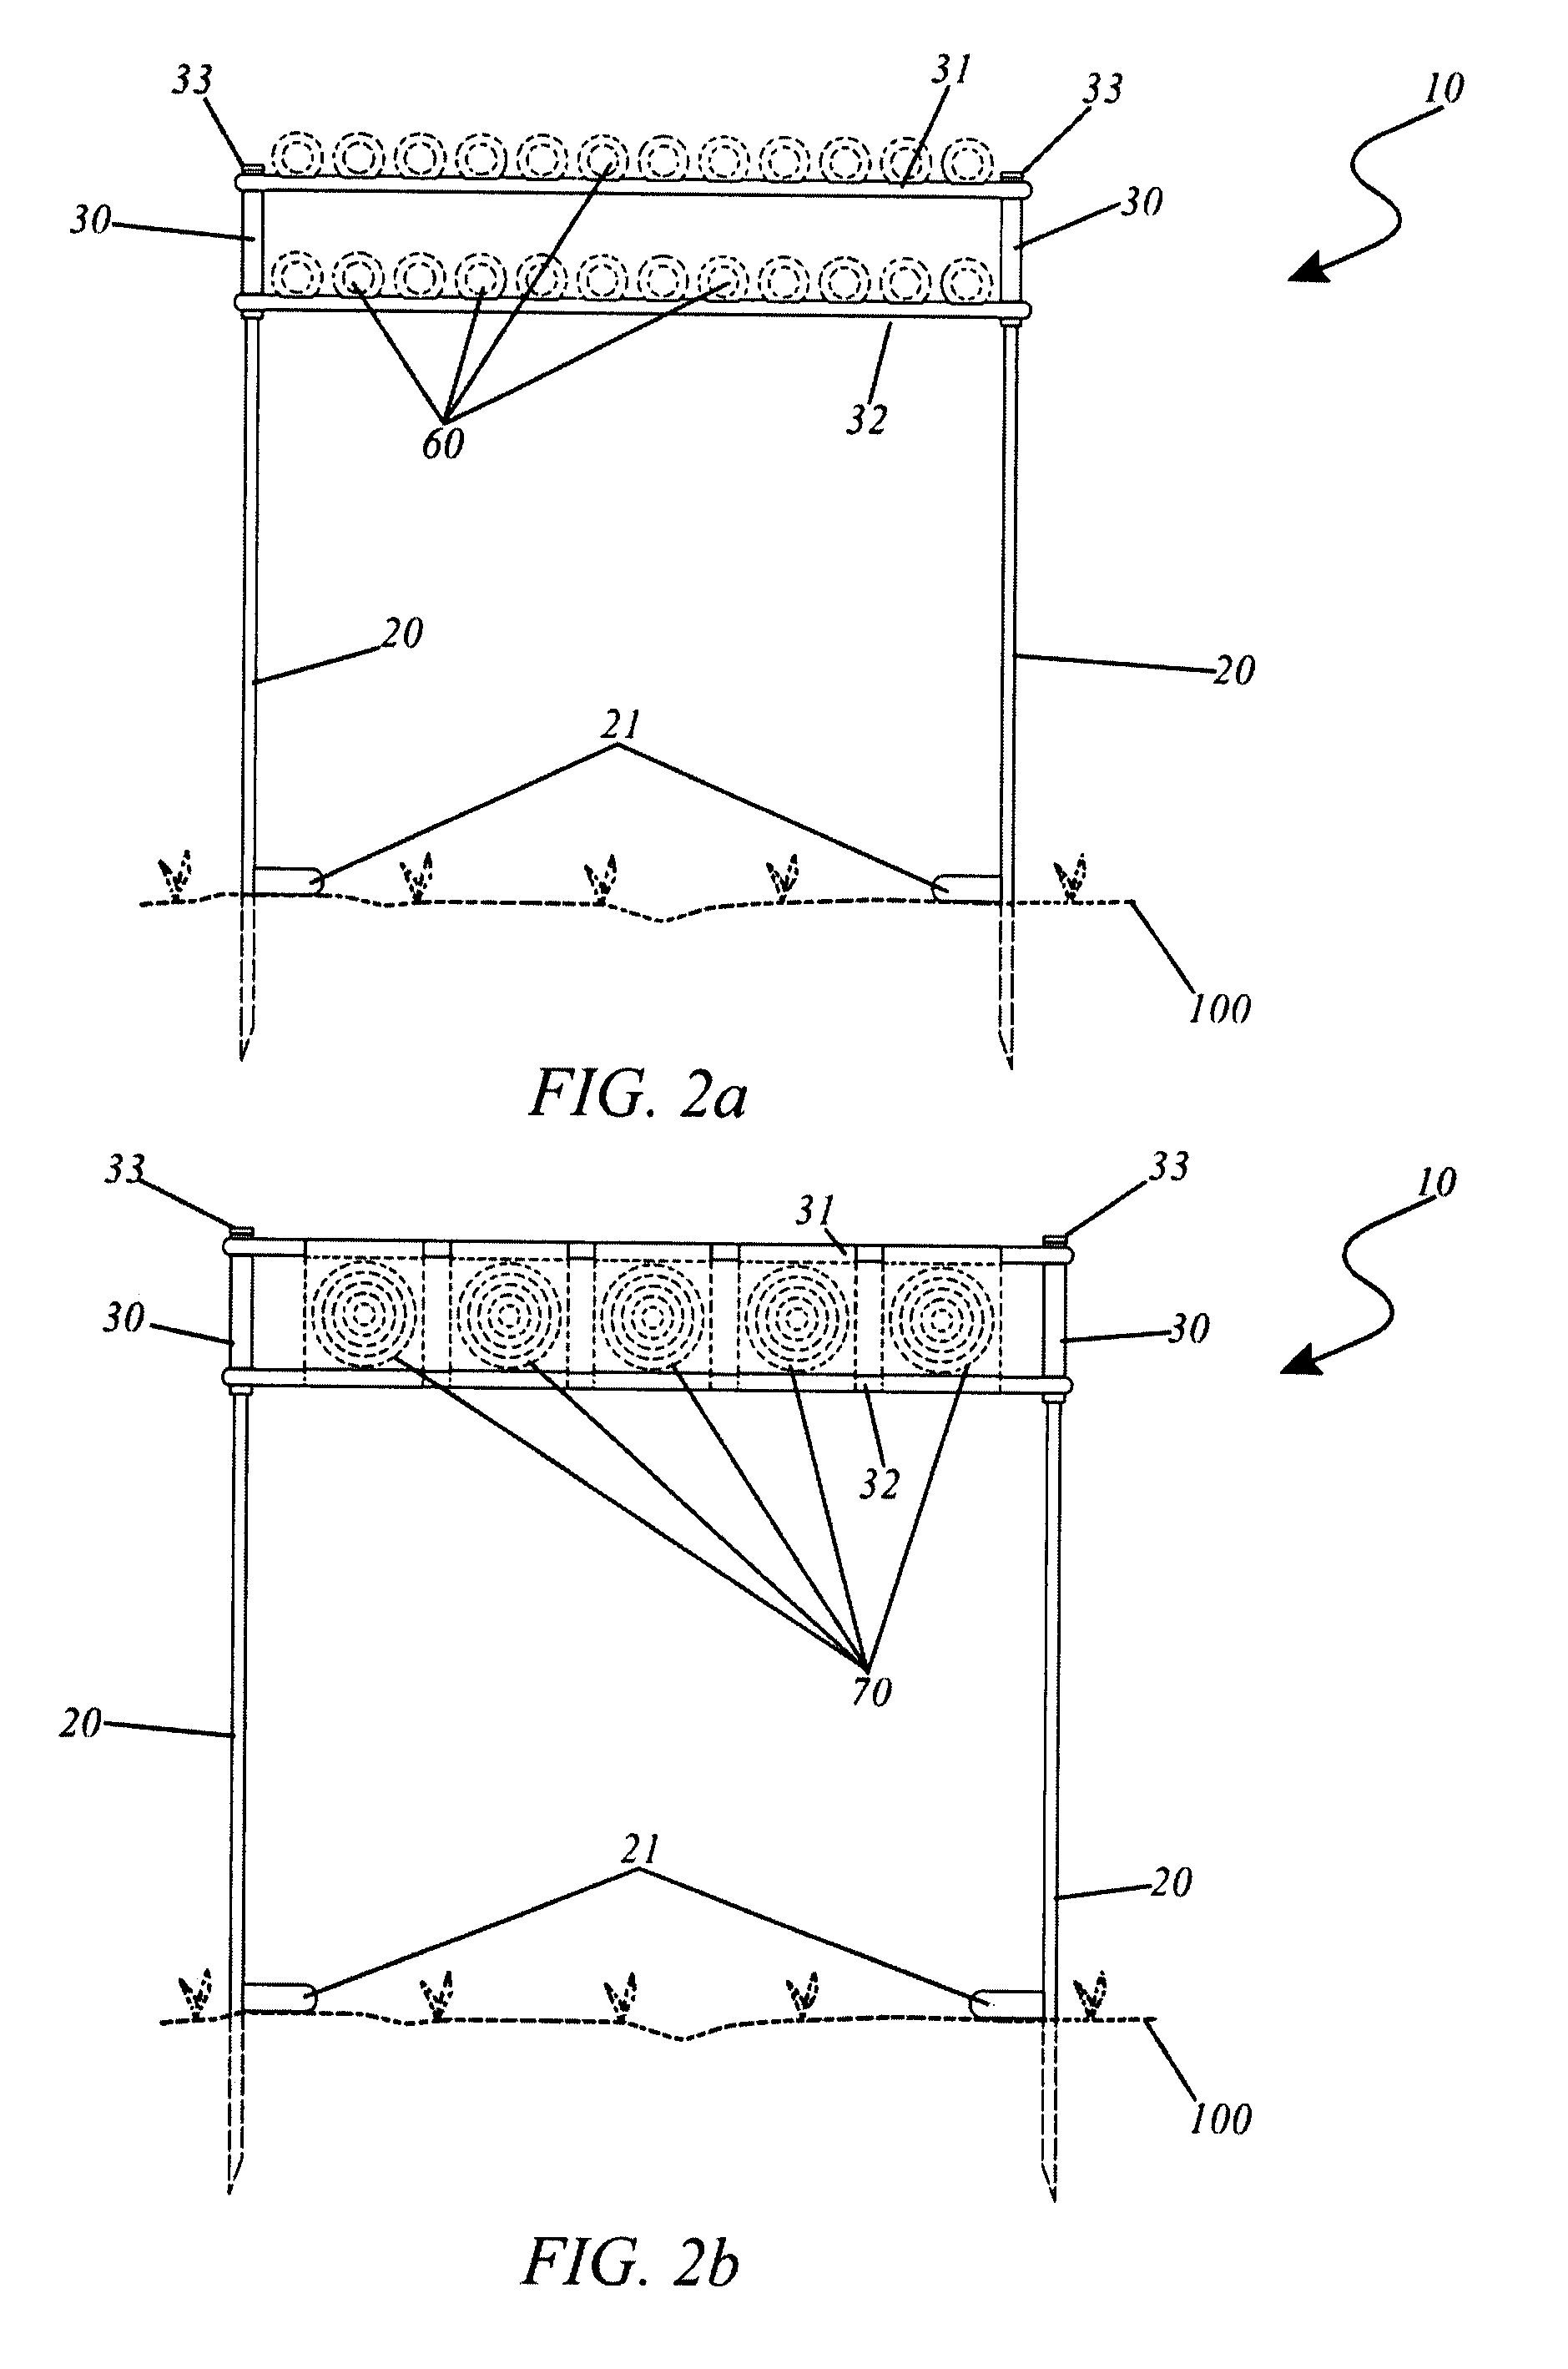 Practice targeting system and method of use thereof